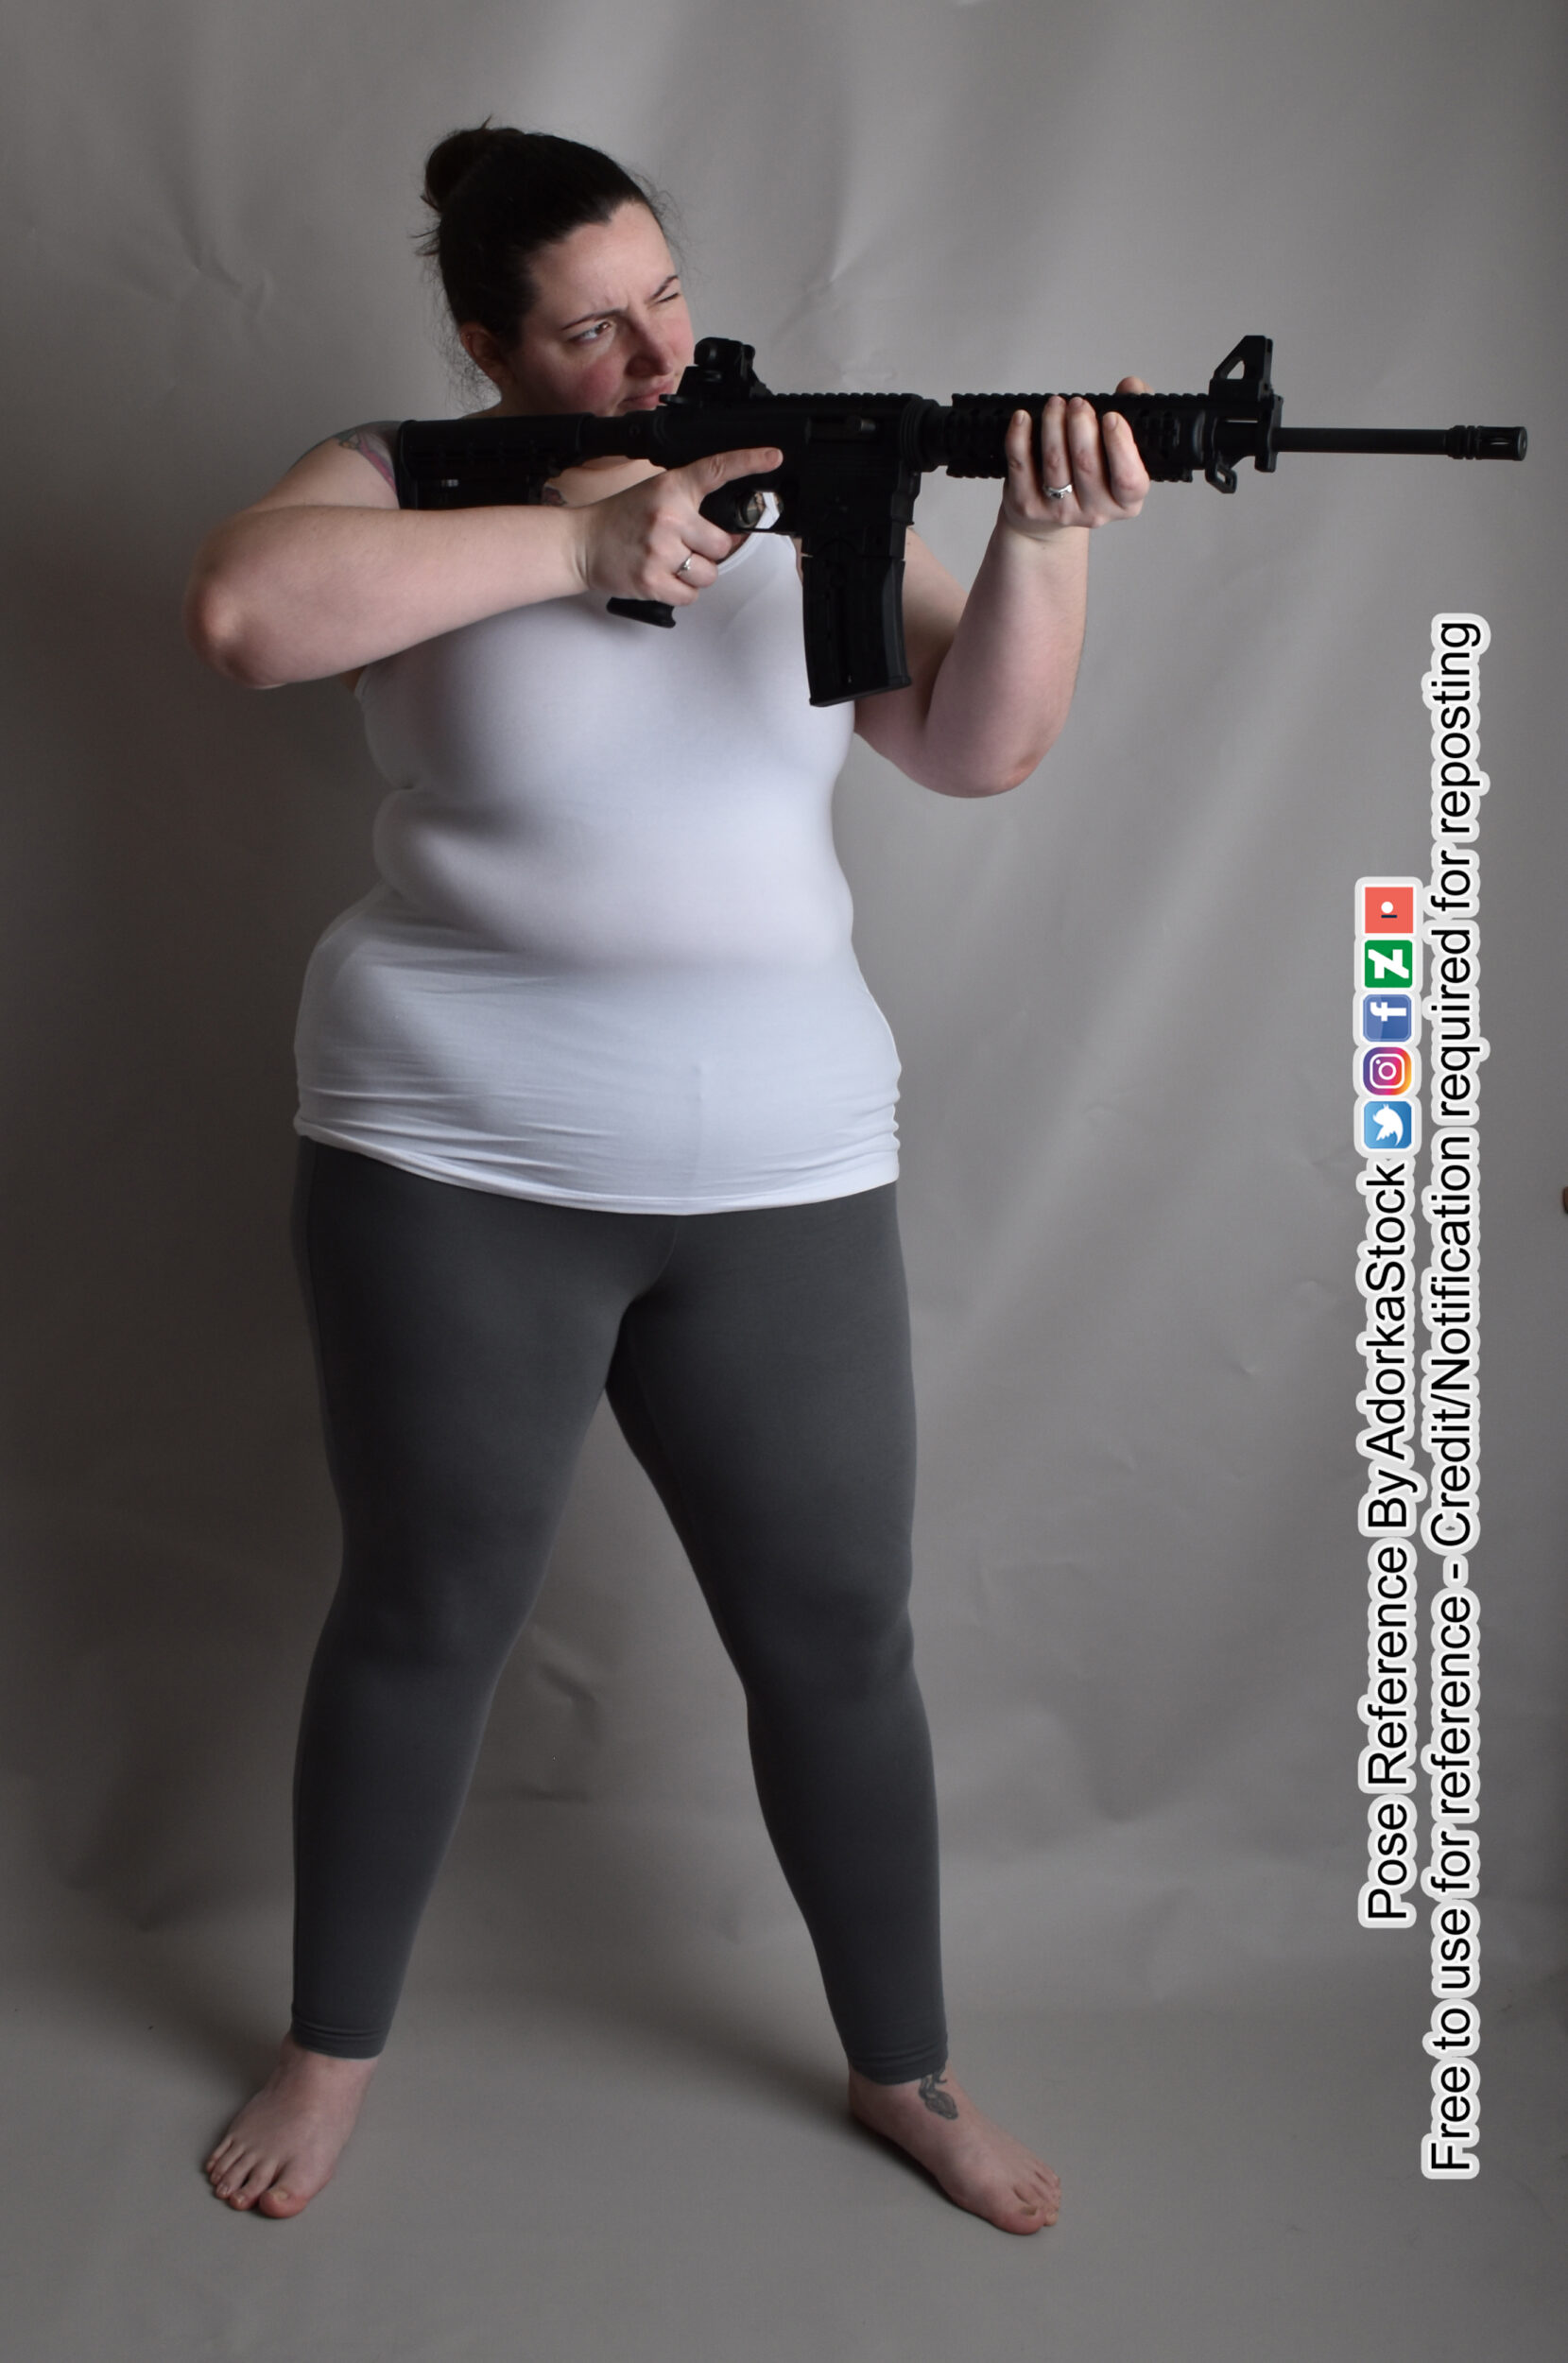 Fat female pose reference model holding a rifle